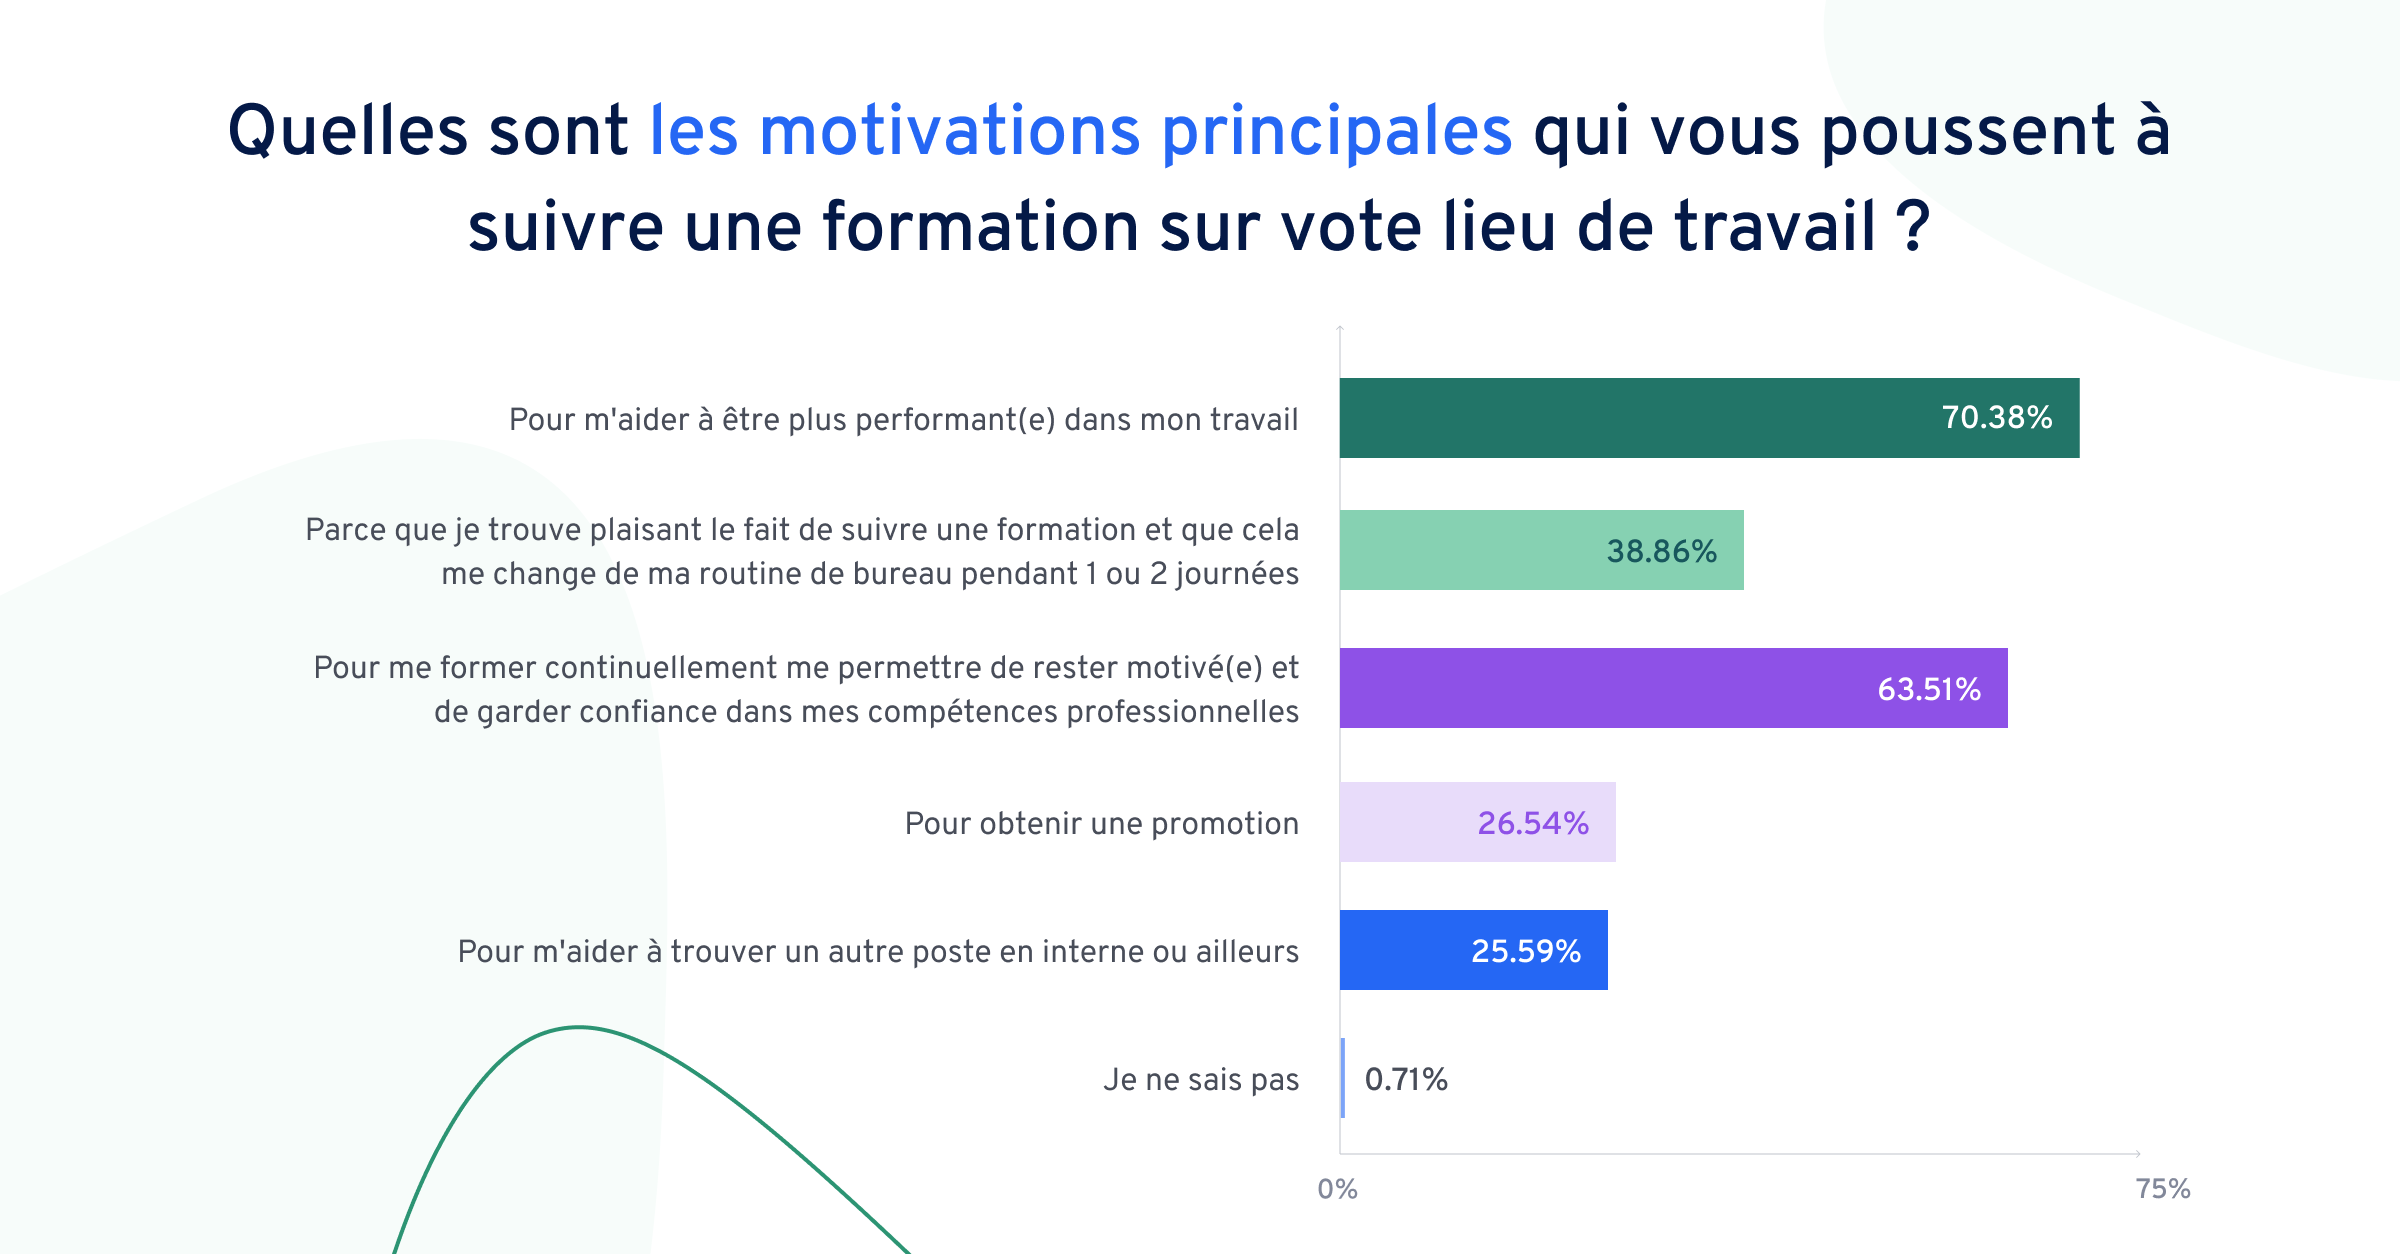 learning-in-the-flow-of-work-report-learning-reasons-france